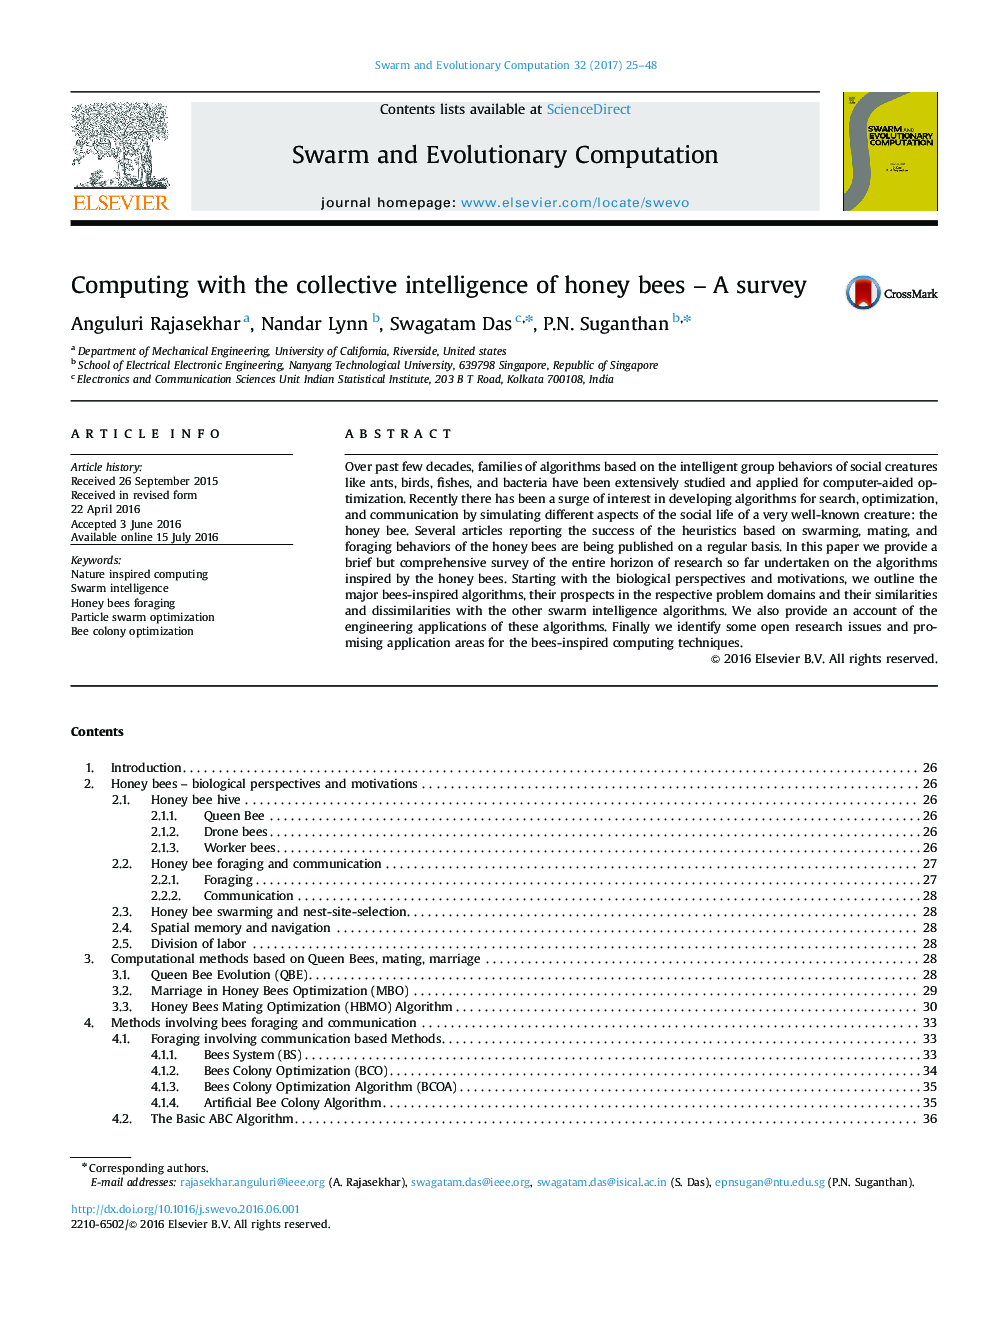 Computing with the collective intelligence of honey bees - A survey